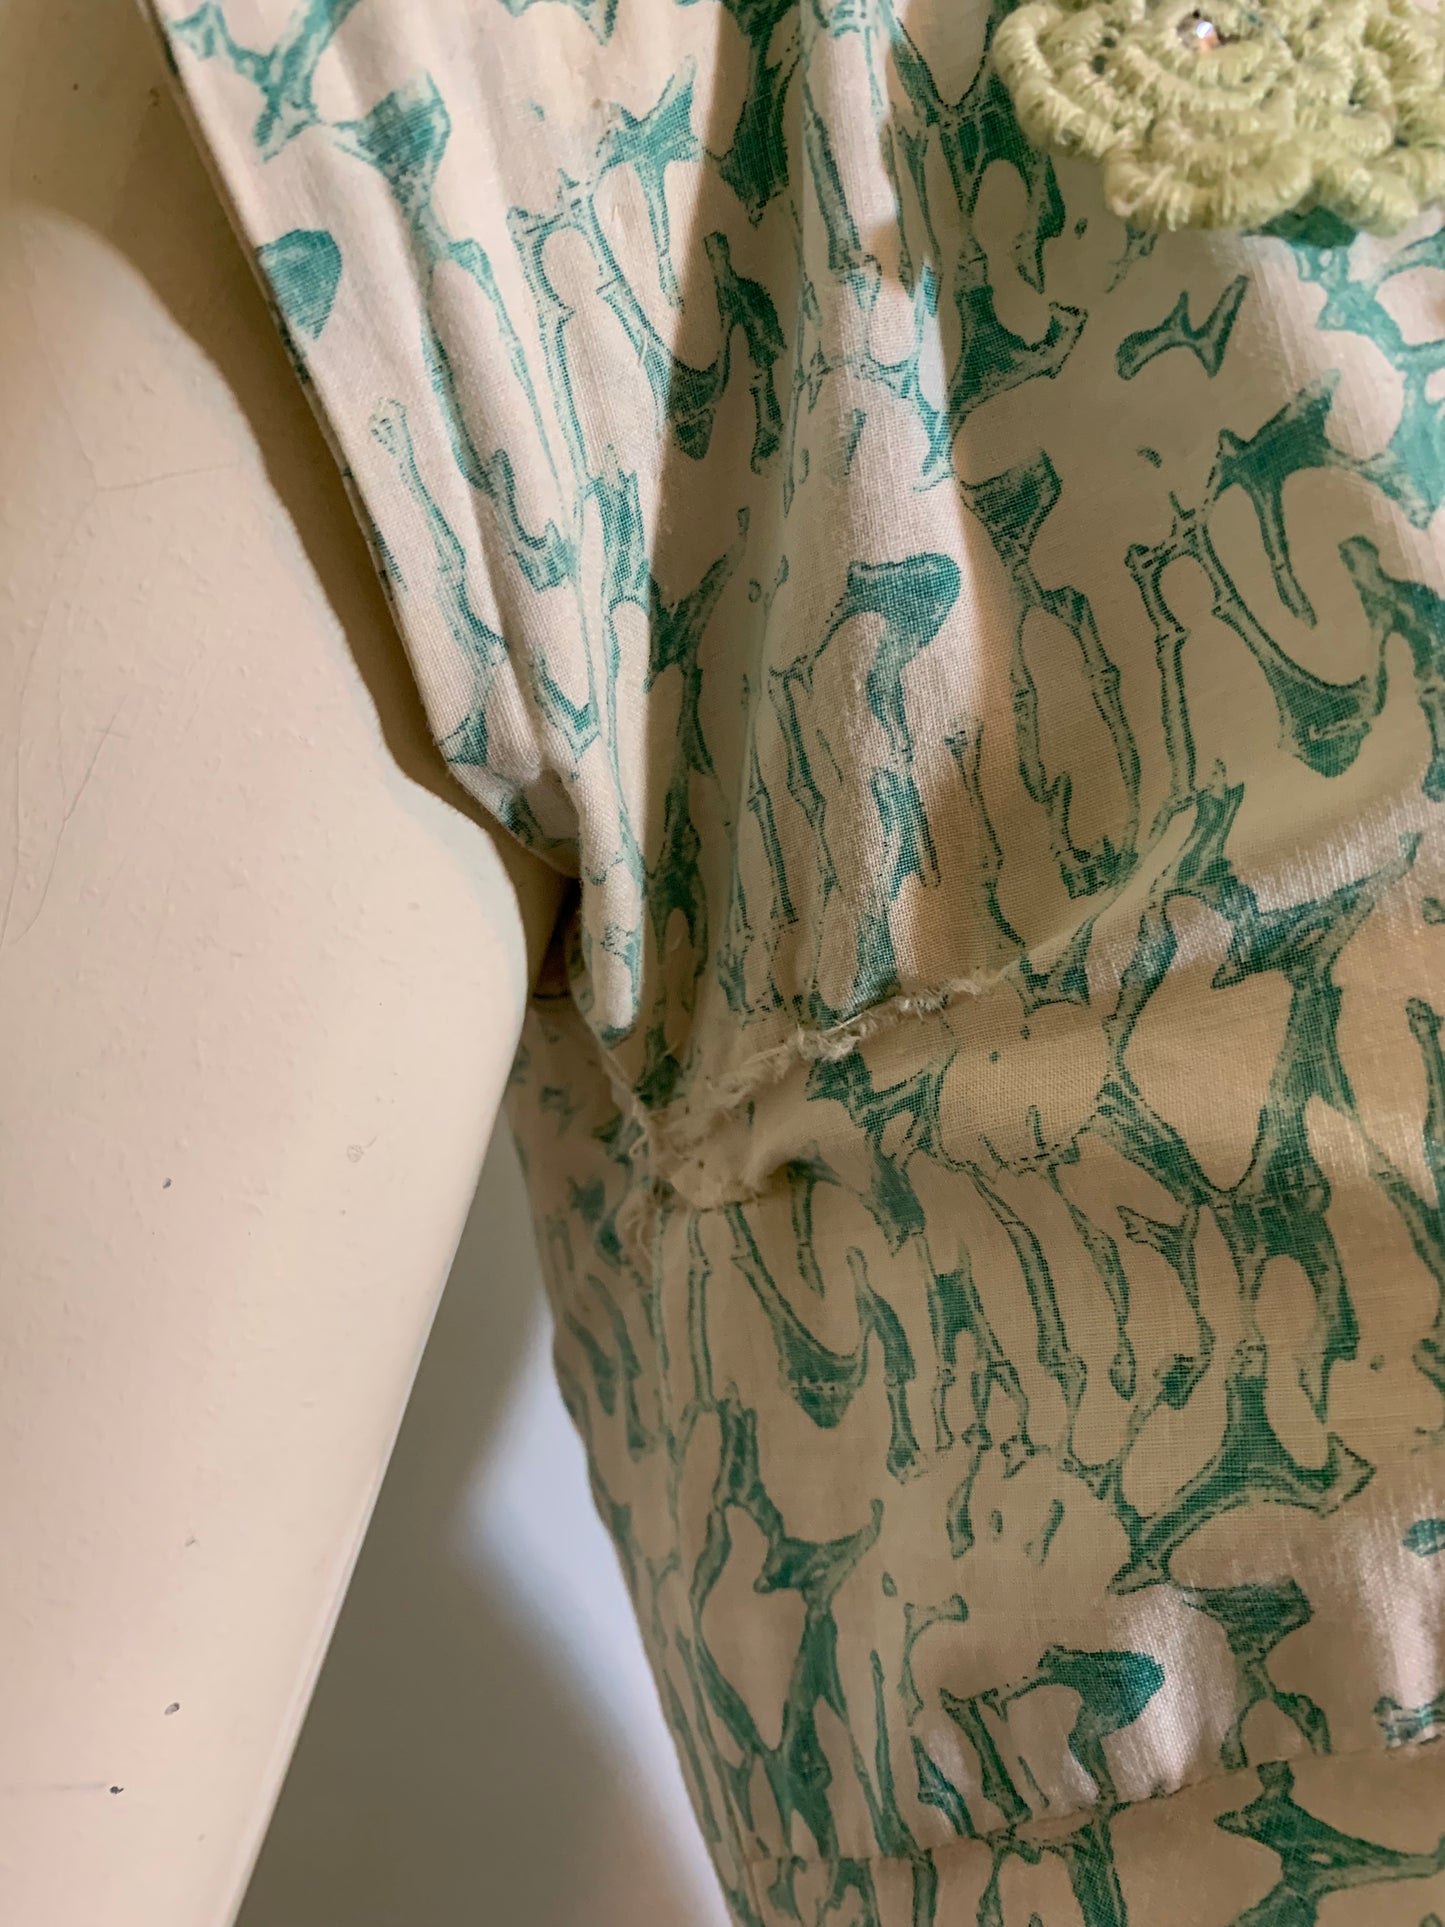 Aqua and Green Abstract Print Lace and Rhinestone Trimmed Dress circa 1950s